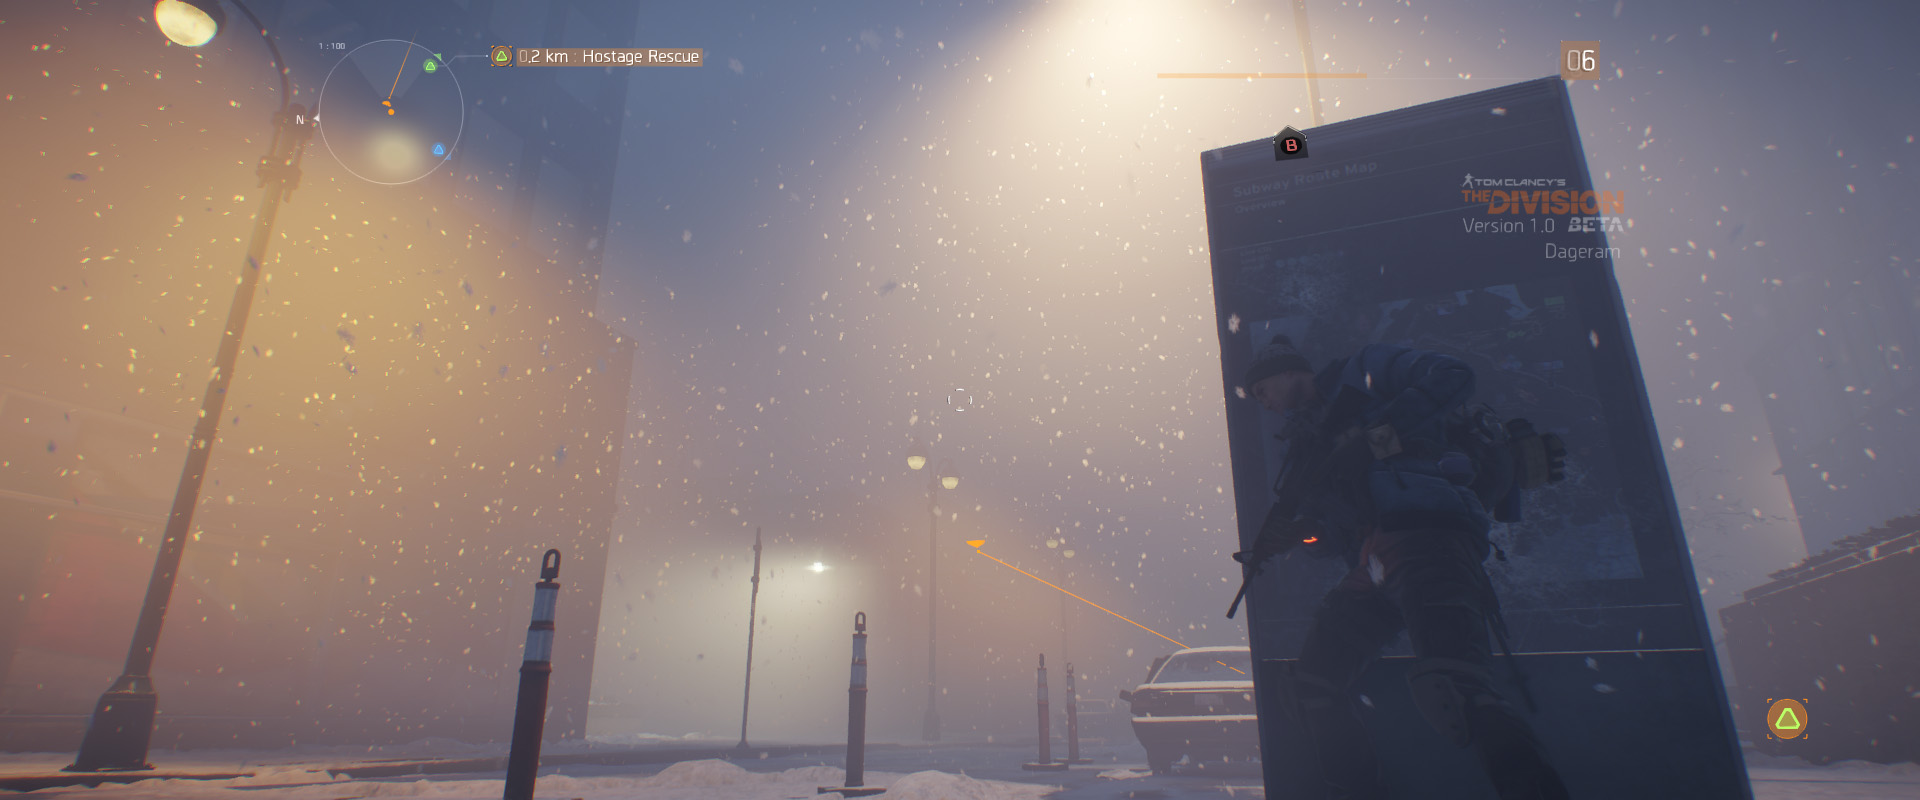 thedivision_2016_01_3zsrp6.jpg